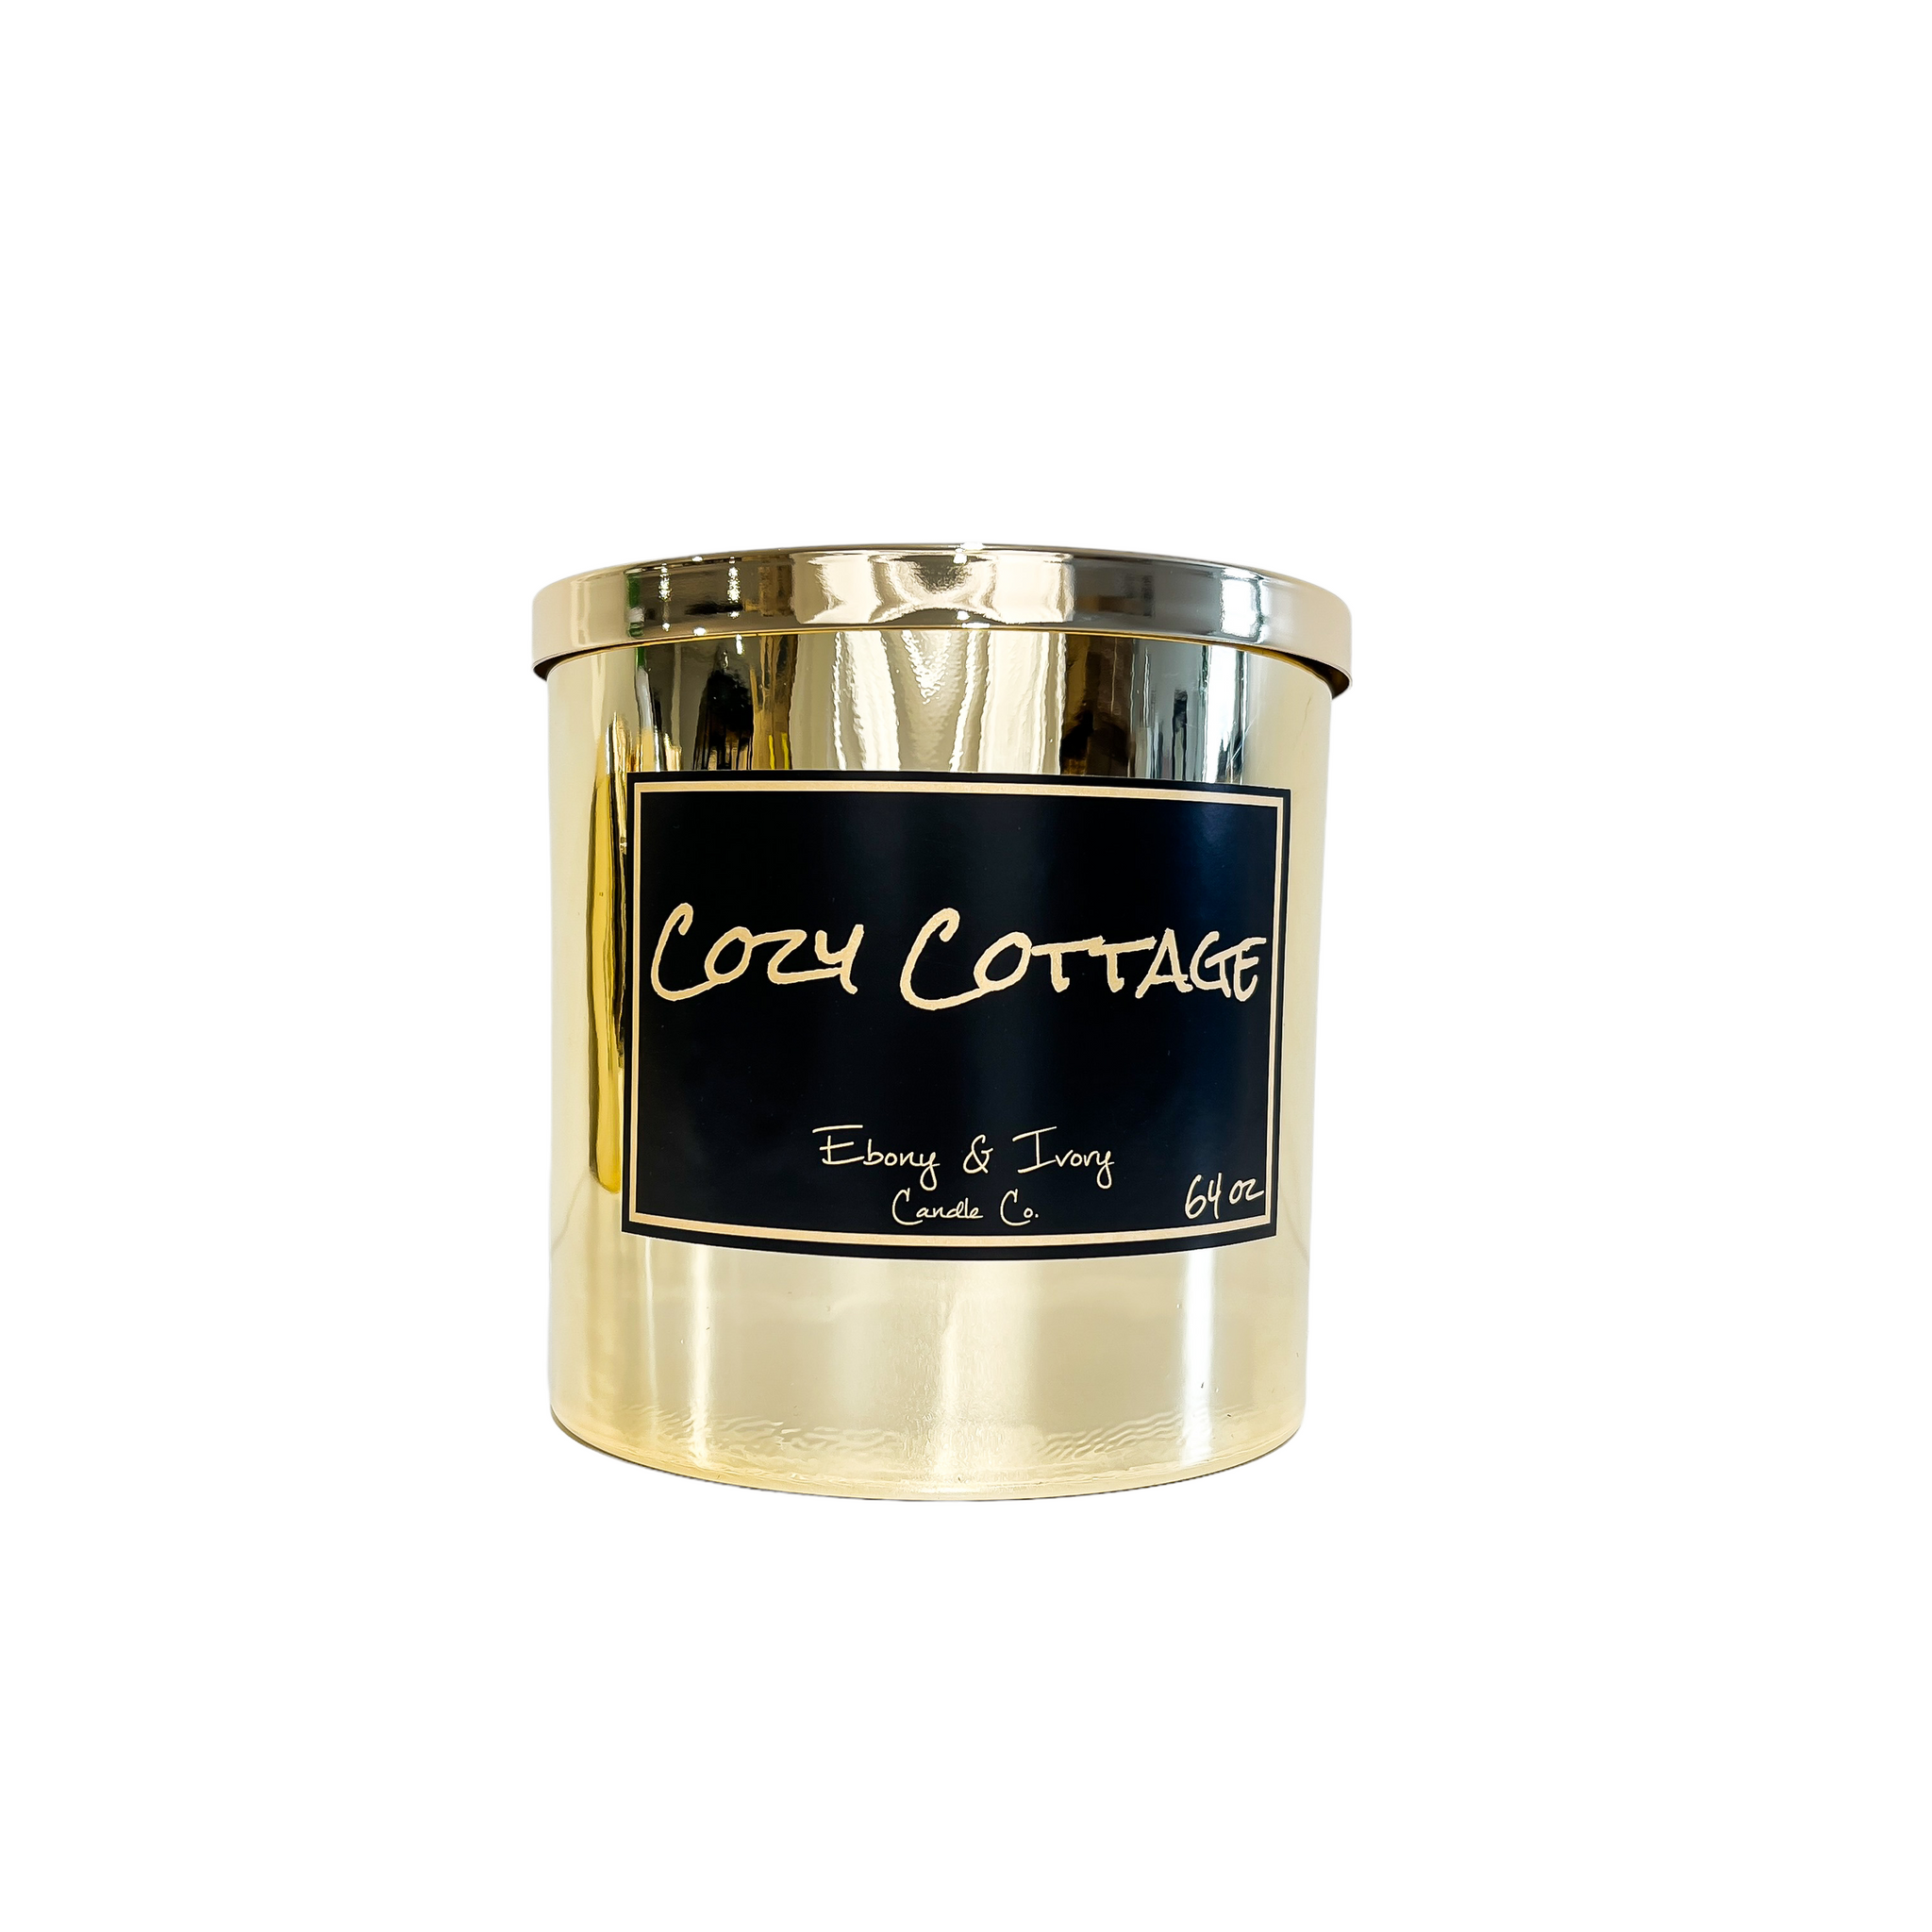 Gold, sixty four ounces, frozen pine, warm spice, and brown sugar scented soy wax candle with a gold lid and a black label that reads Cozy Cottage